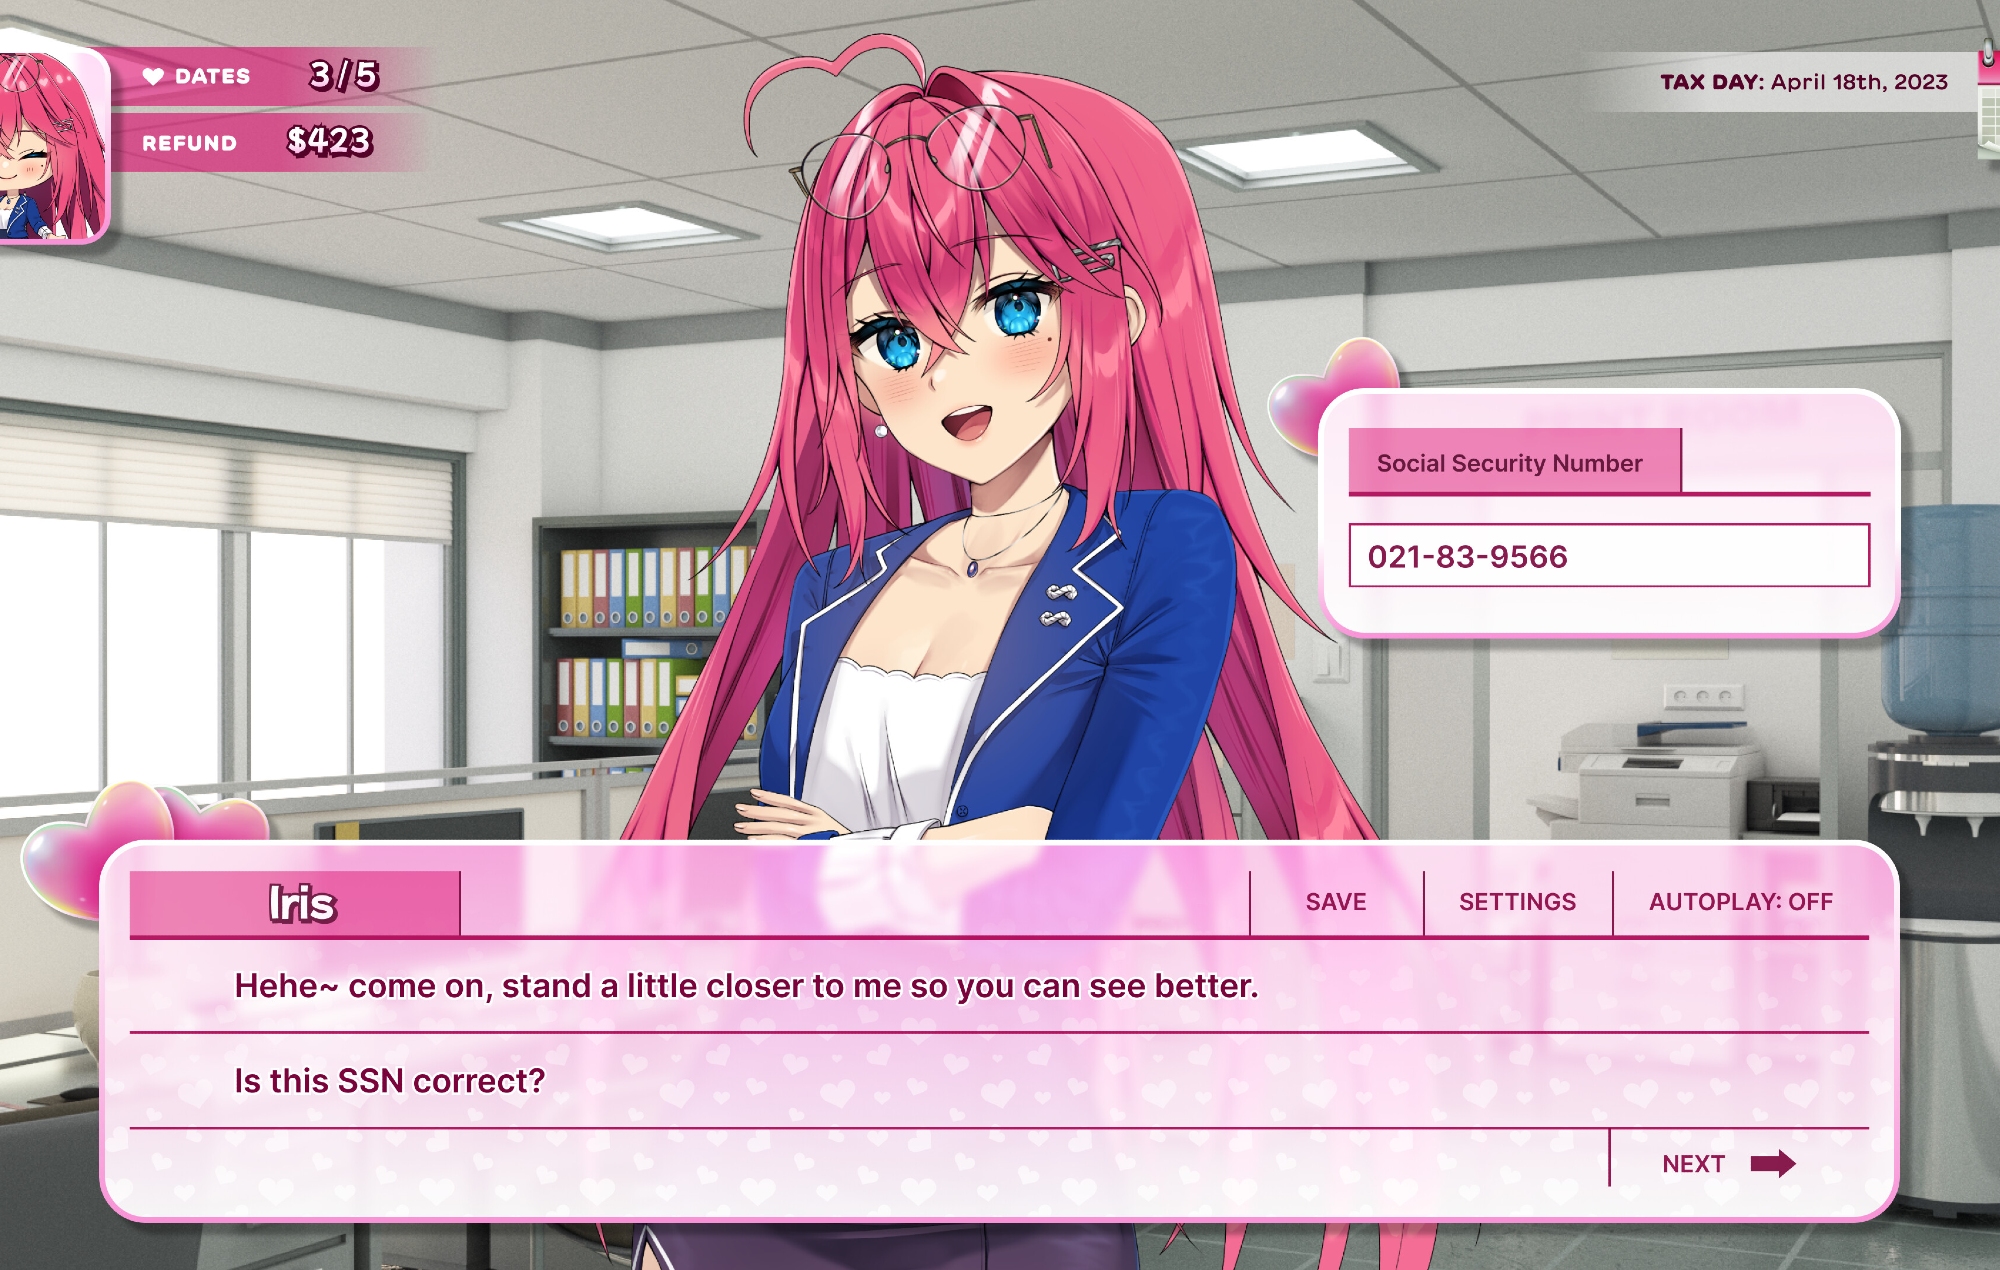 Dating Simulator Game Preps Your Taxes, Mocks TurboTax